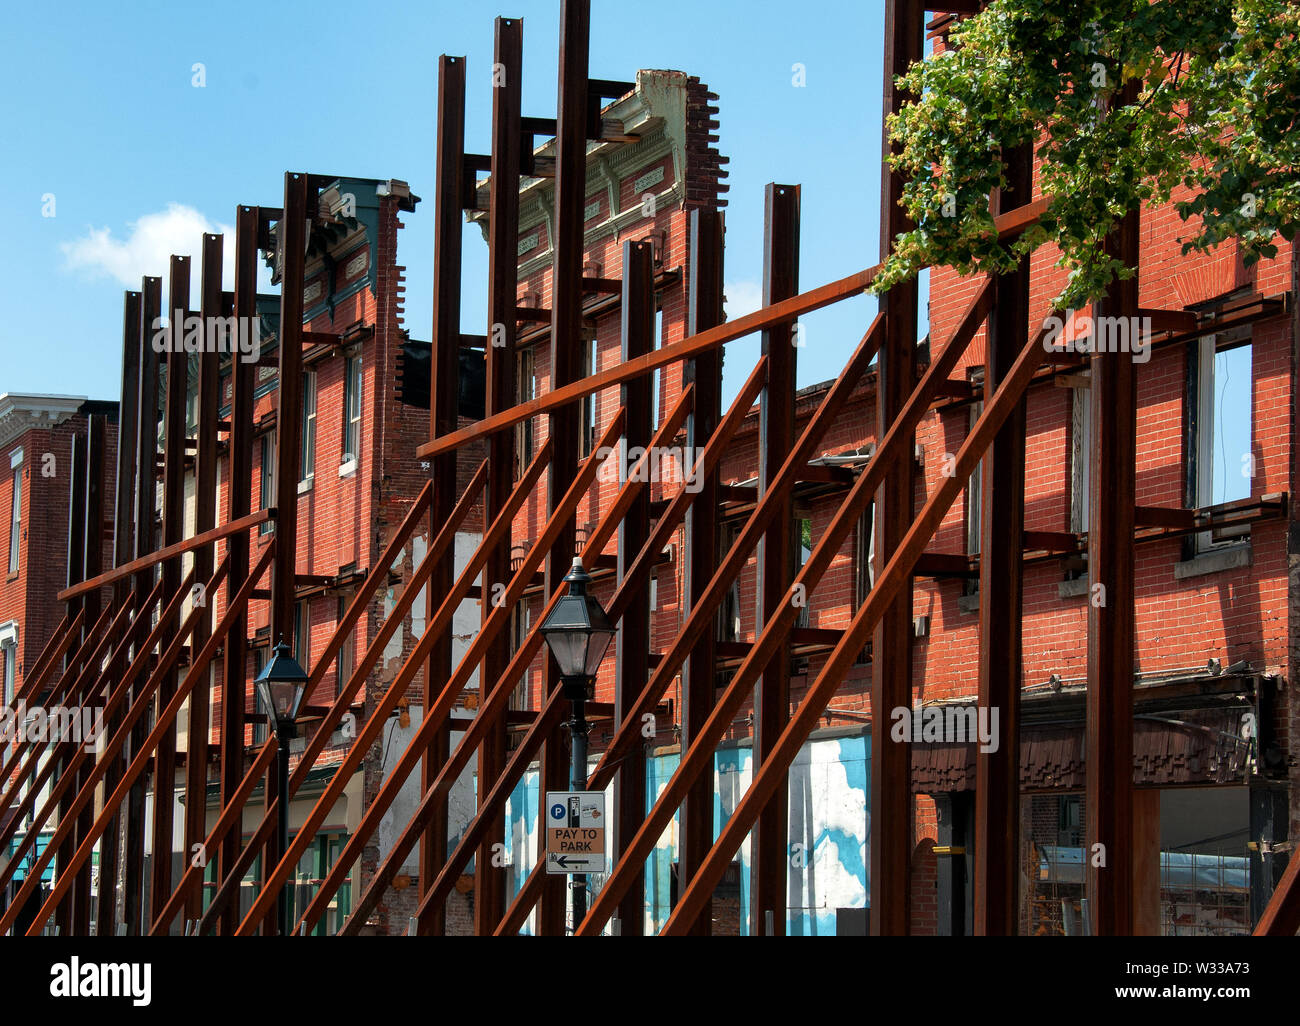 Preservation of brick facade in an urban setting. Stock Photo